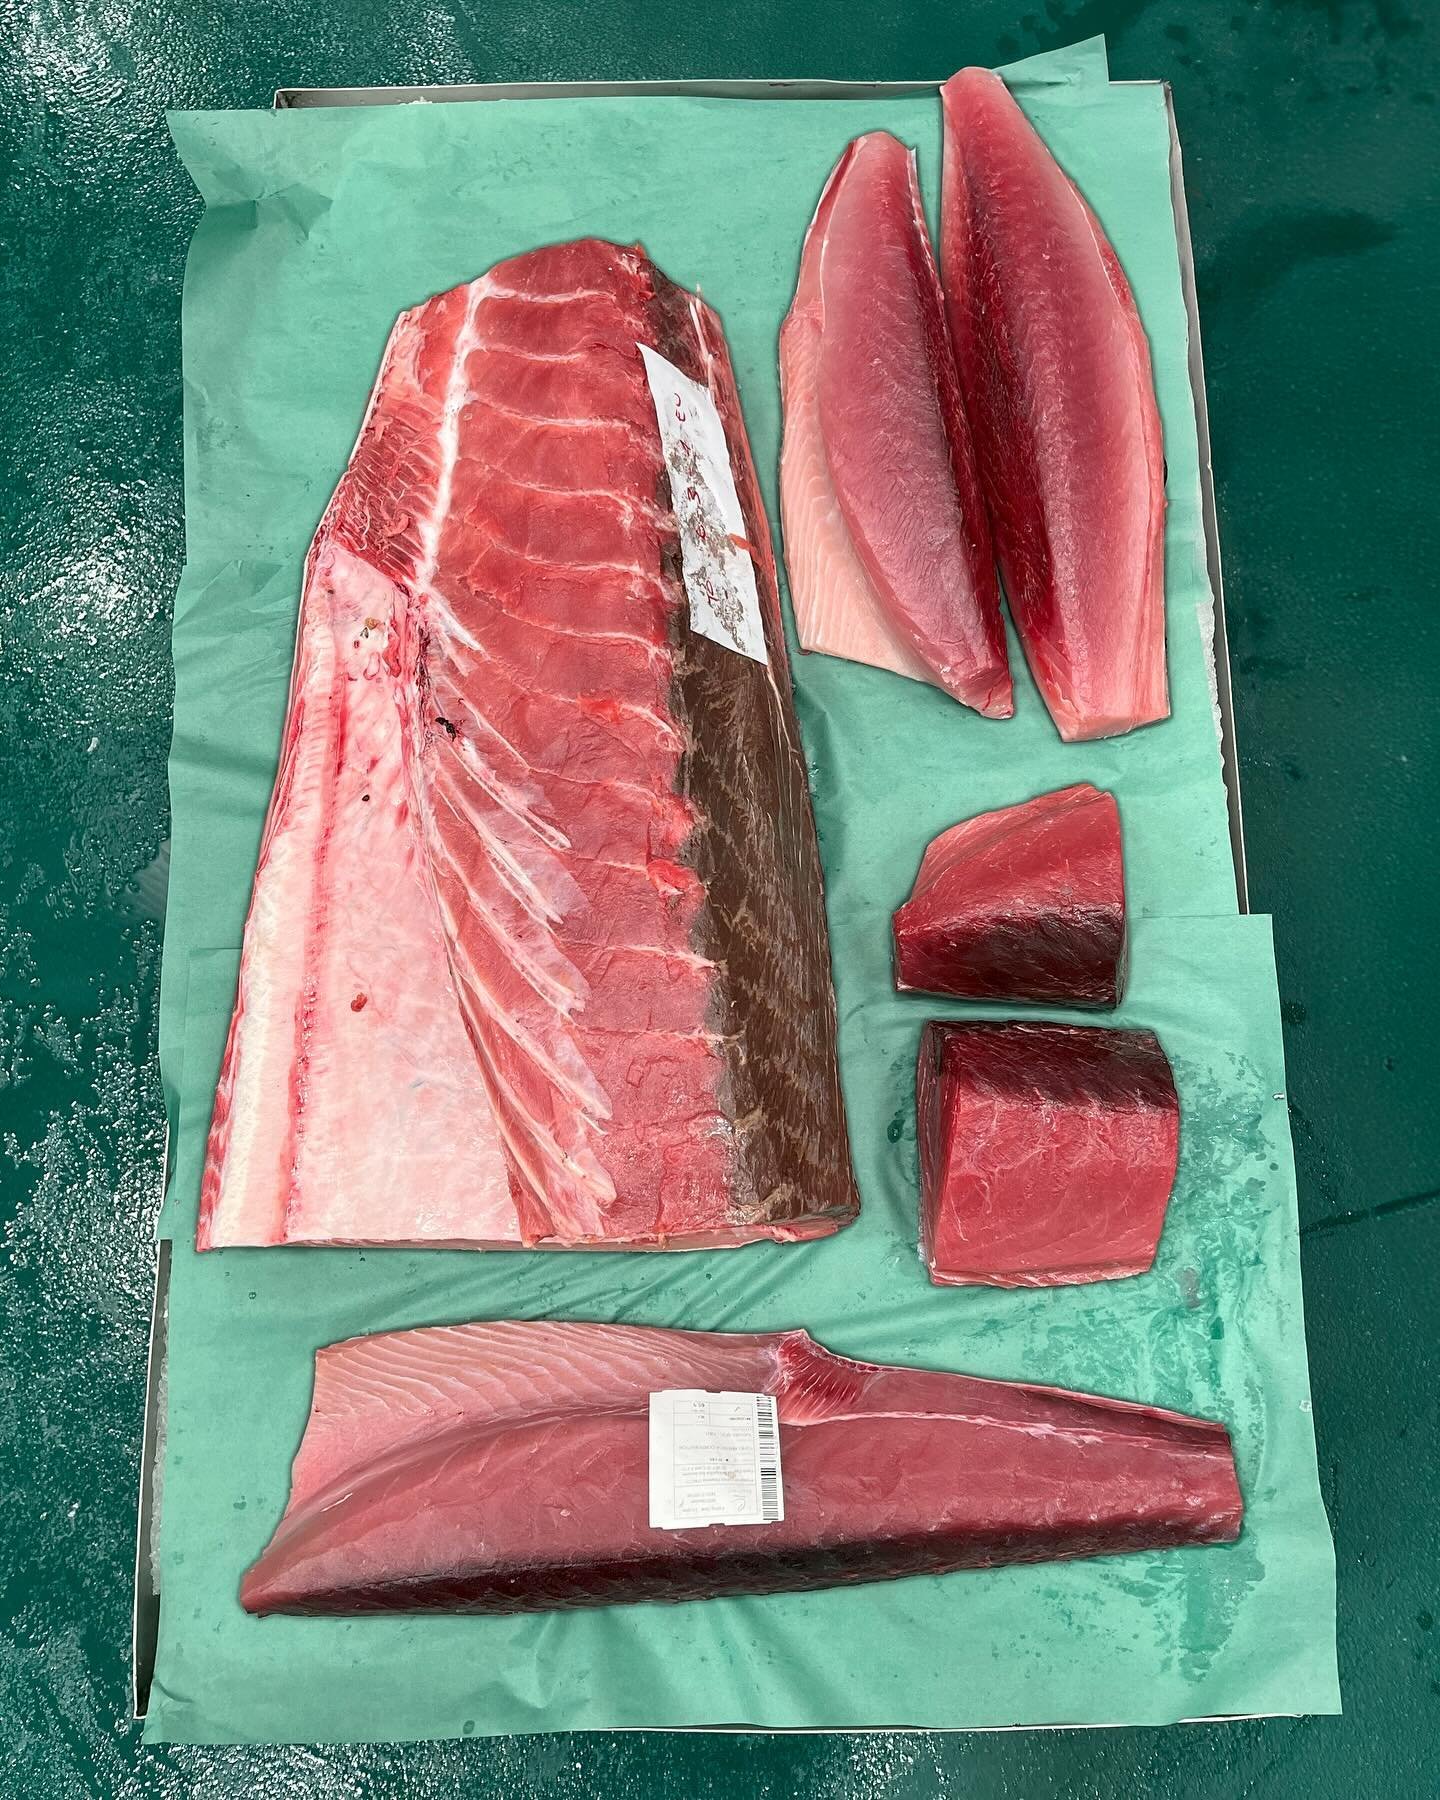 Our tuna comes in all shapes and sizes. But QUALITY always comes first! 🐟✅
.
.
.
#sushi #sashimicuts #sashimi #bluefintunafishing #fishingphotodaily #saltwater #fishingpic #fishingtime #socalfishing #fishingdaily #fishingaddict #fishing #fishingpico